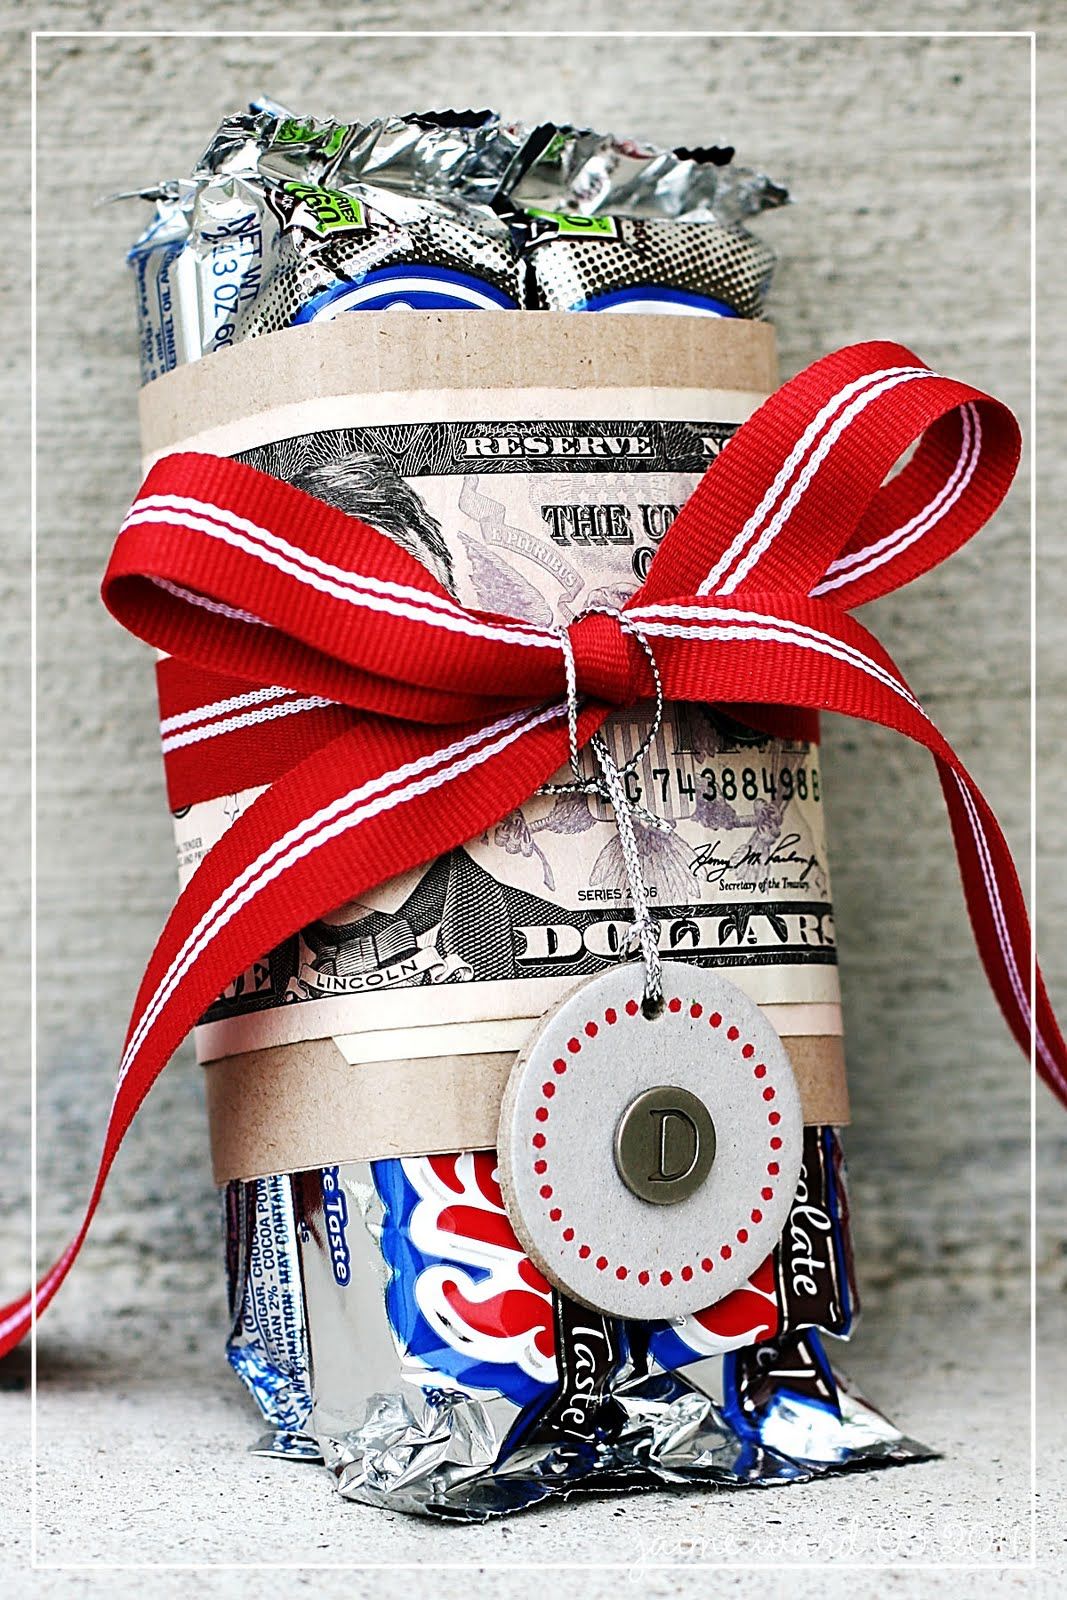 favorite candy & cash…fun gift for the hard-to-buy-for teen.